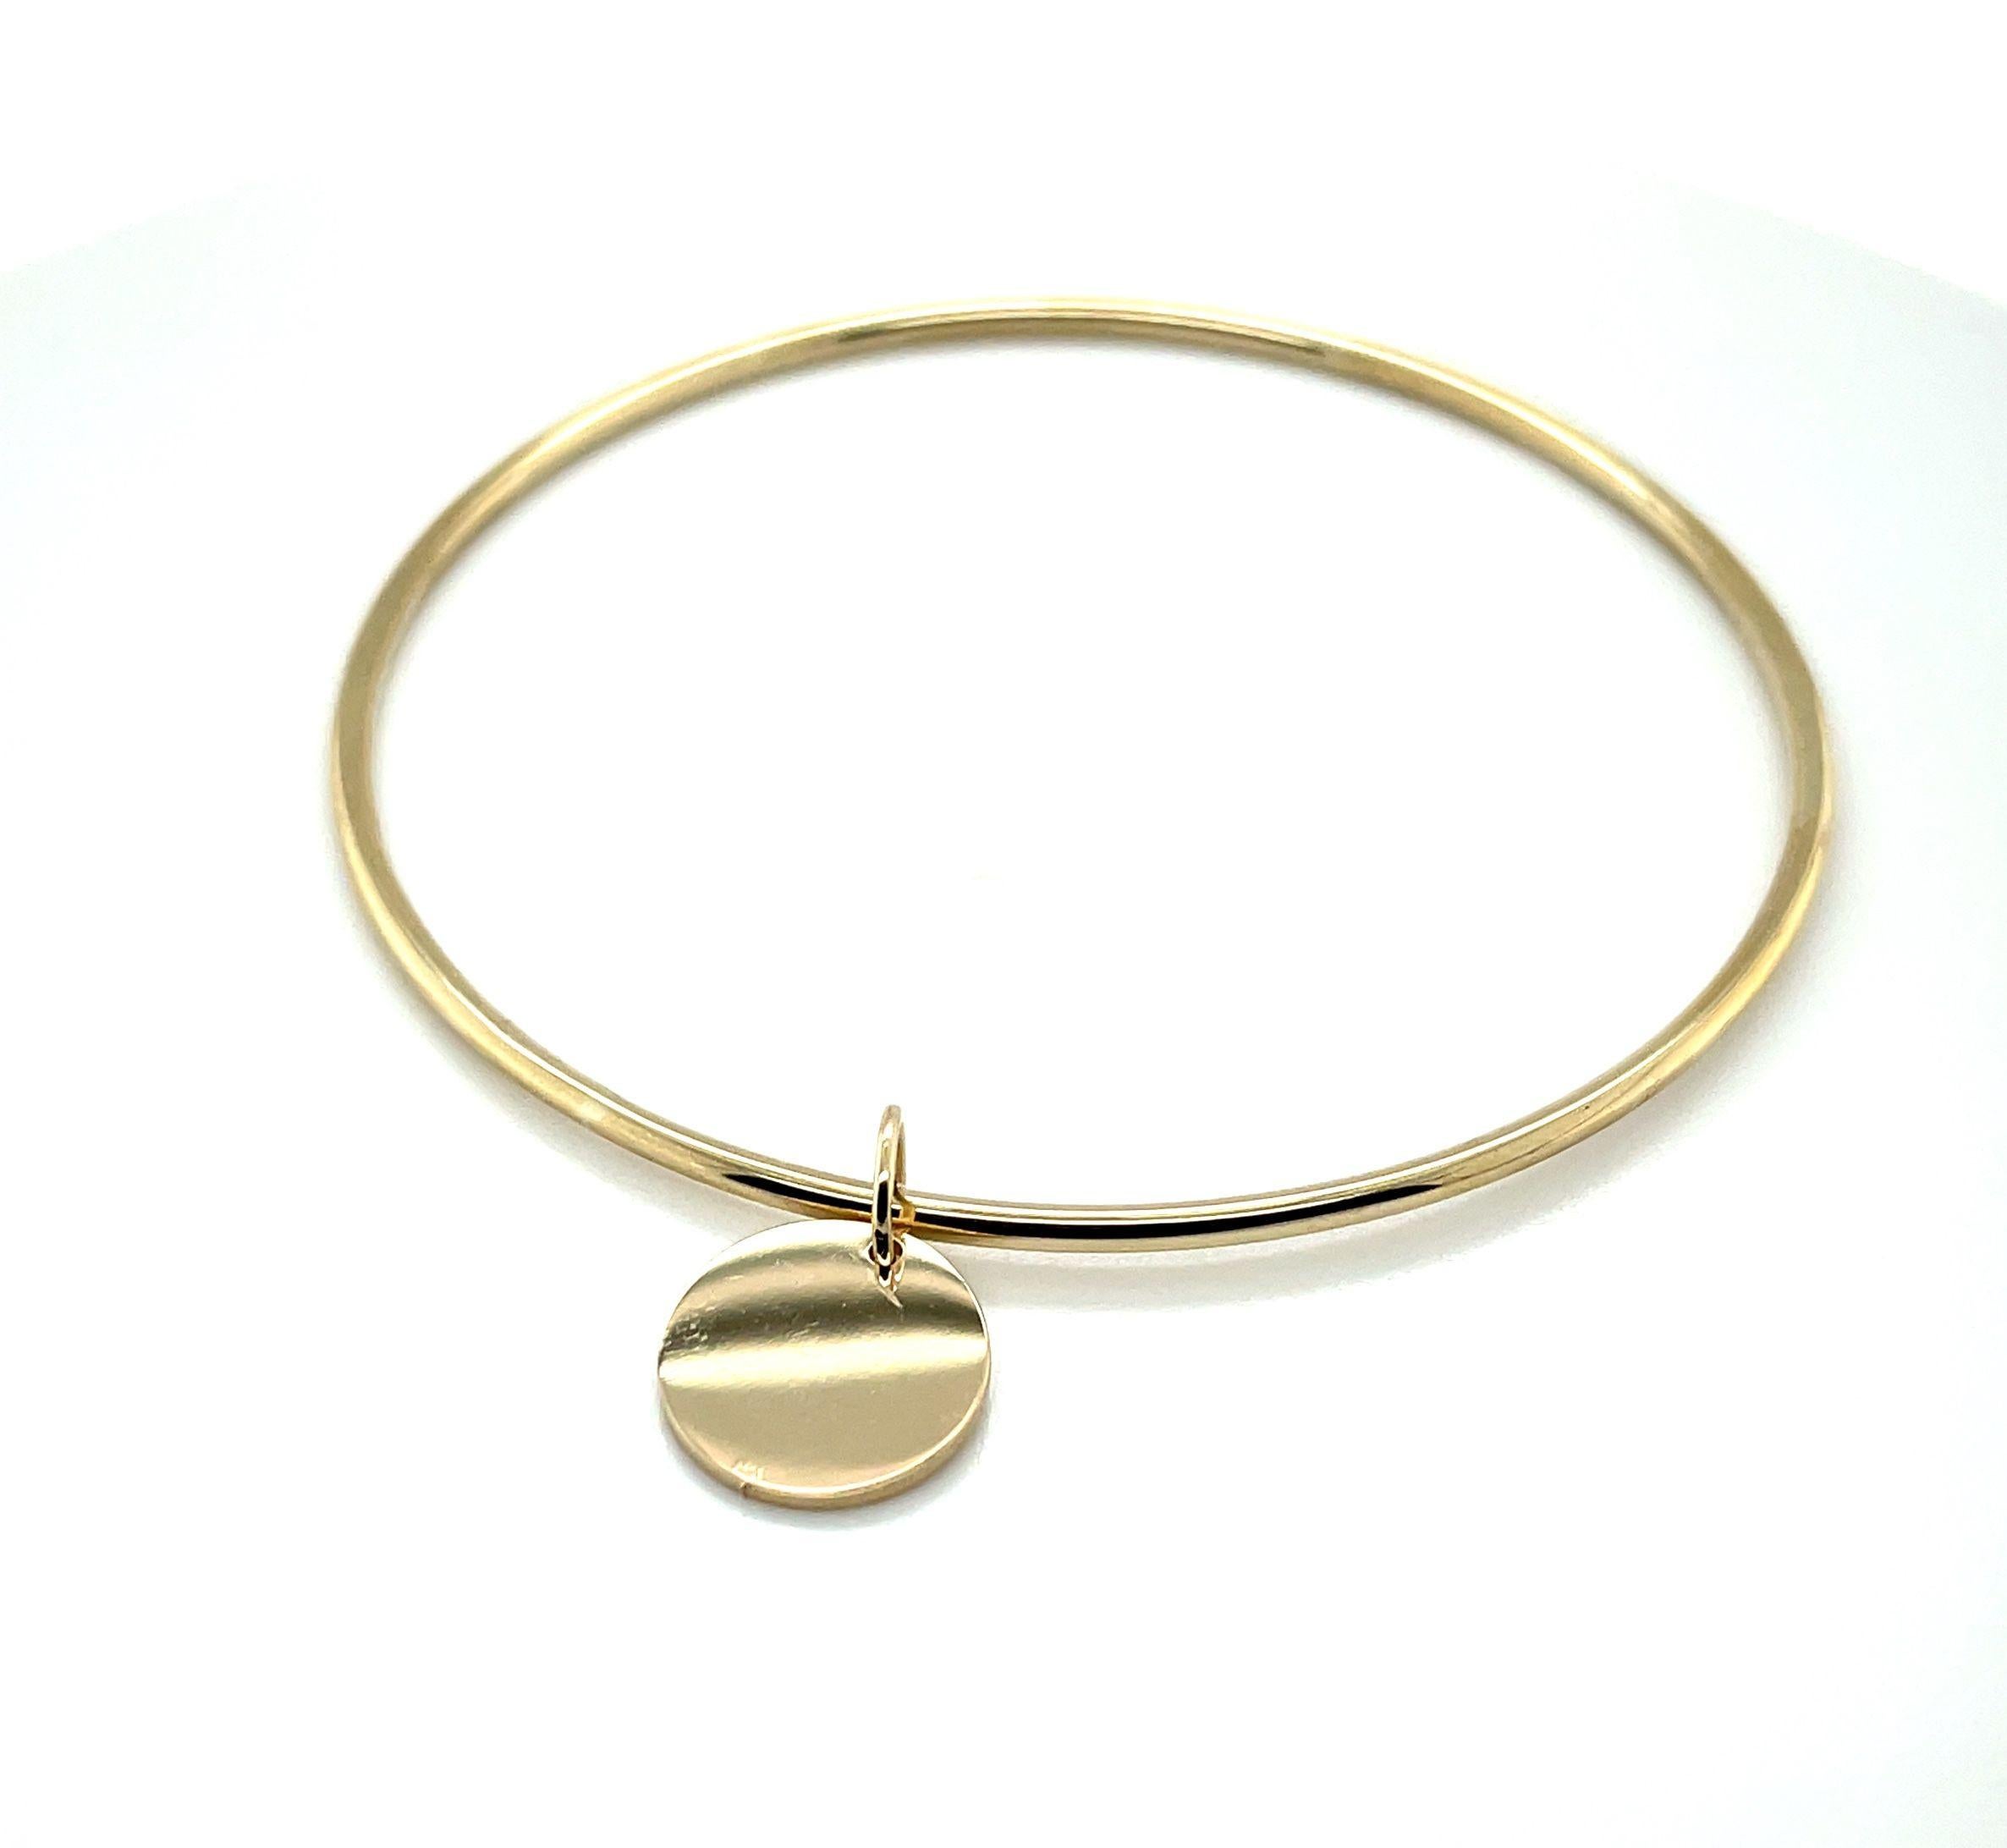 Round Bangle Bracelet with Engravable Charm in 14k Yellow Gold For Sale 1